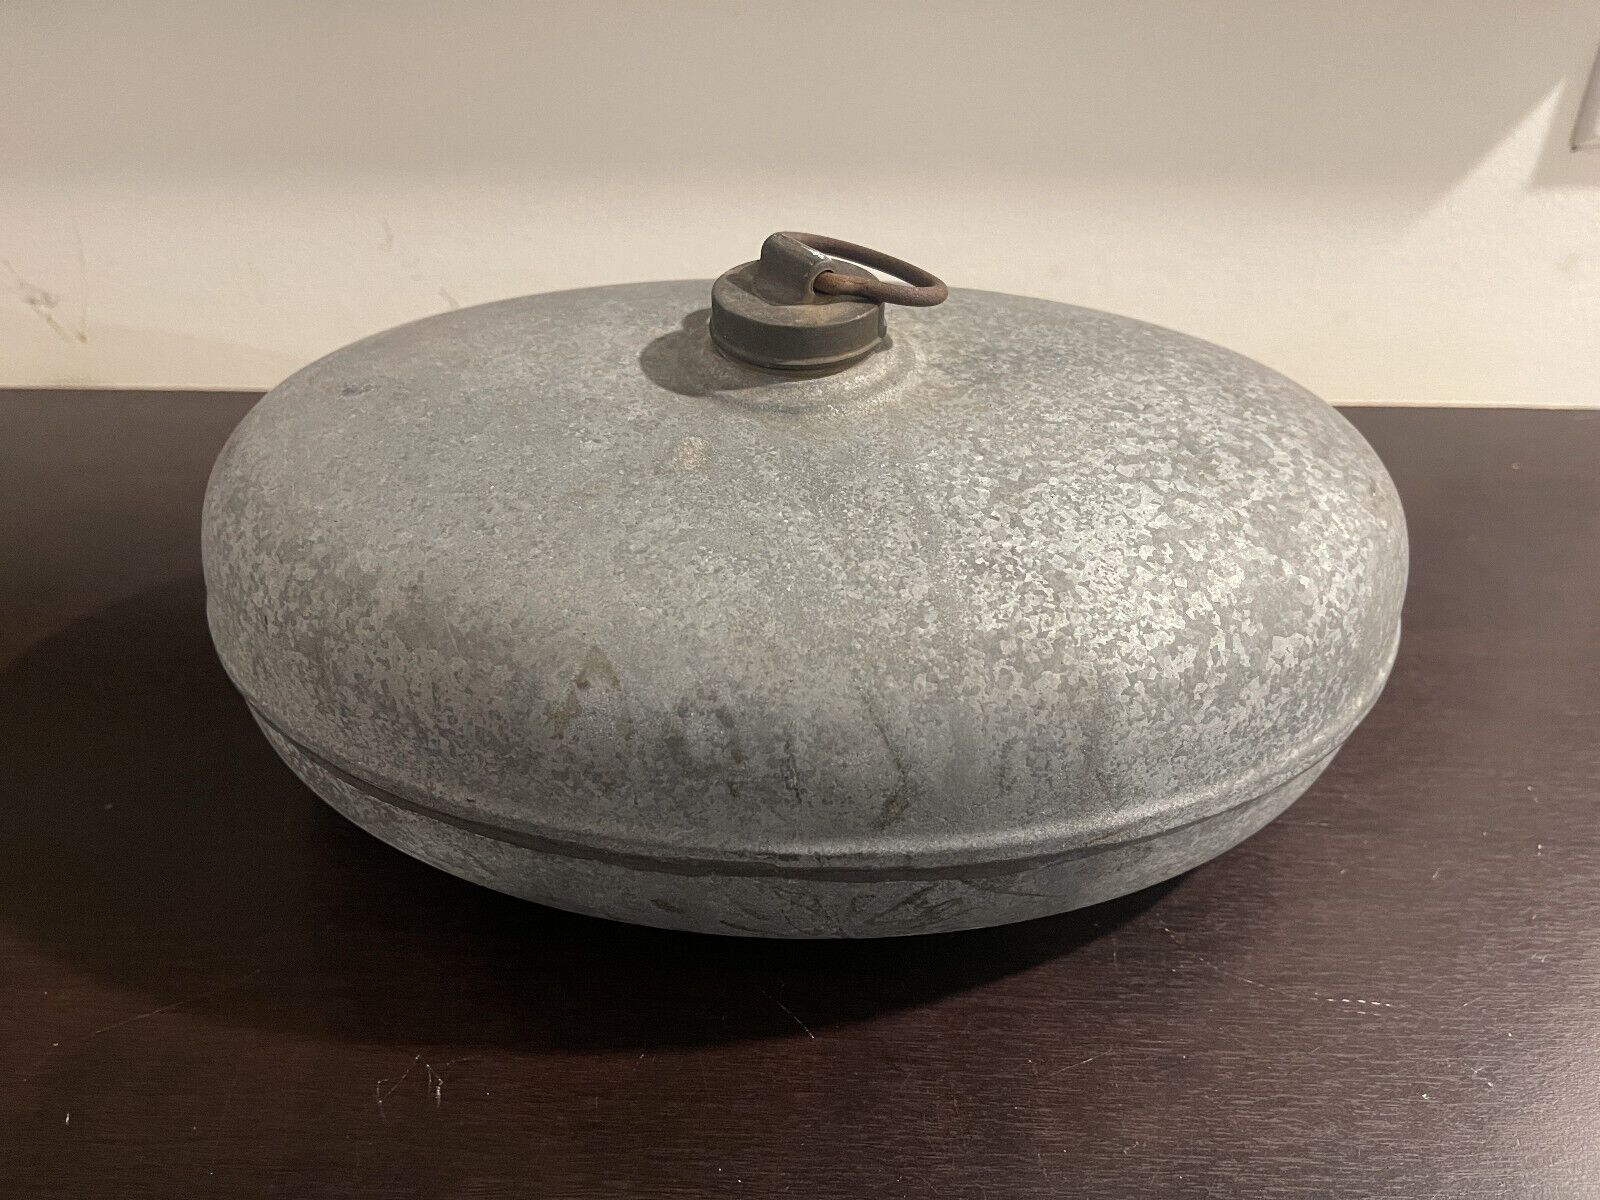 Antique Zinc Oval Football Shaped Hot Water Bottle Bed Warmer with Brass Top